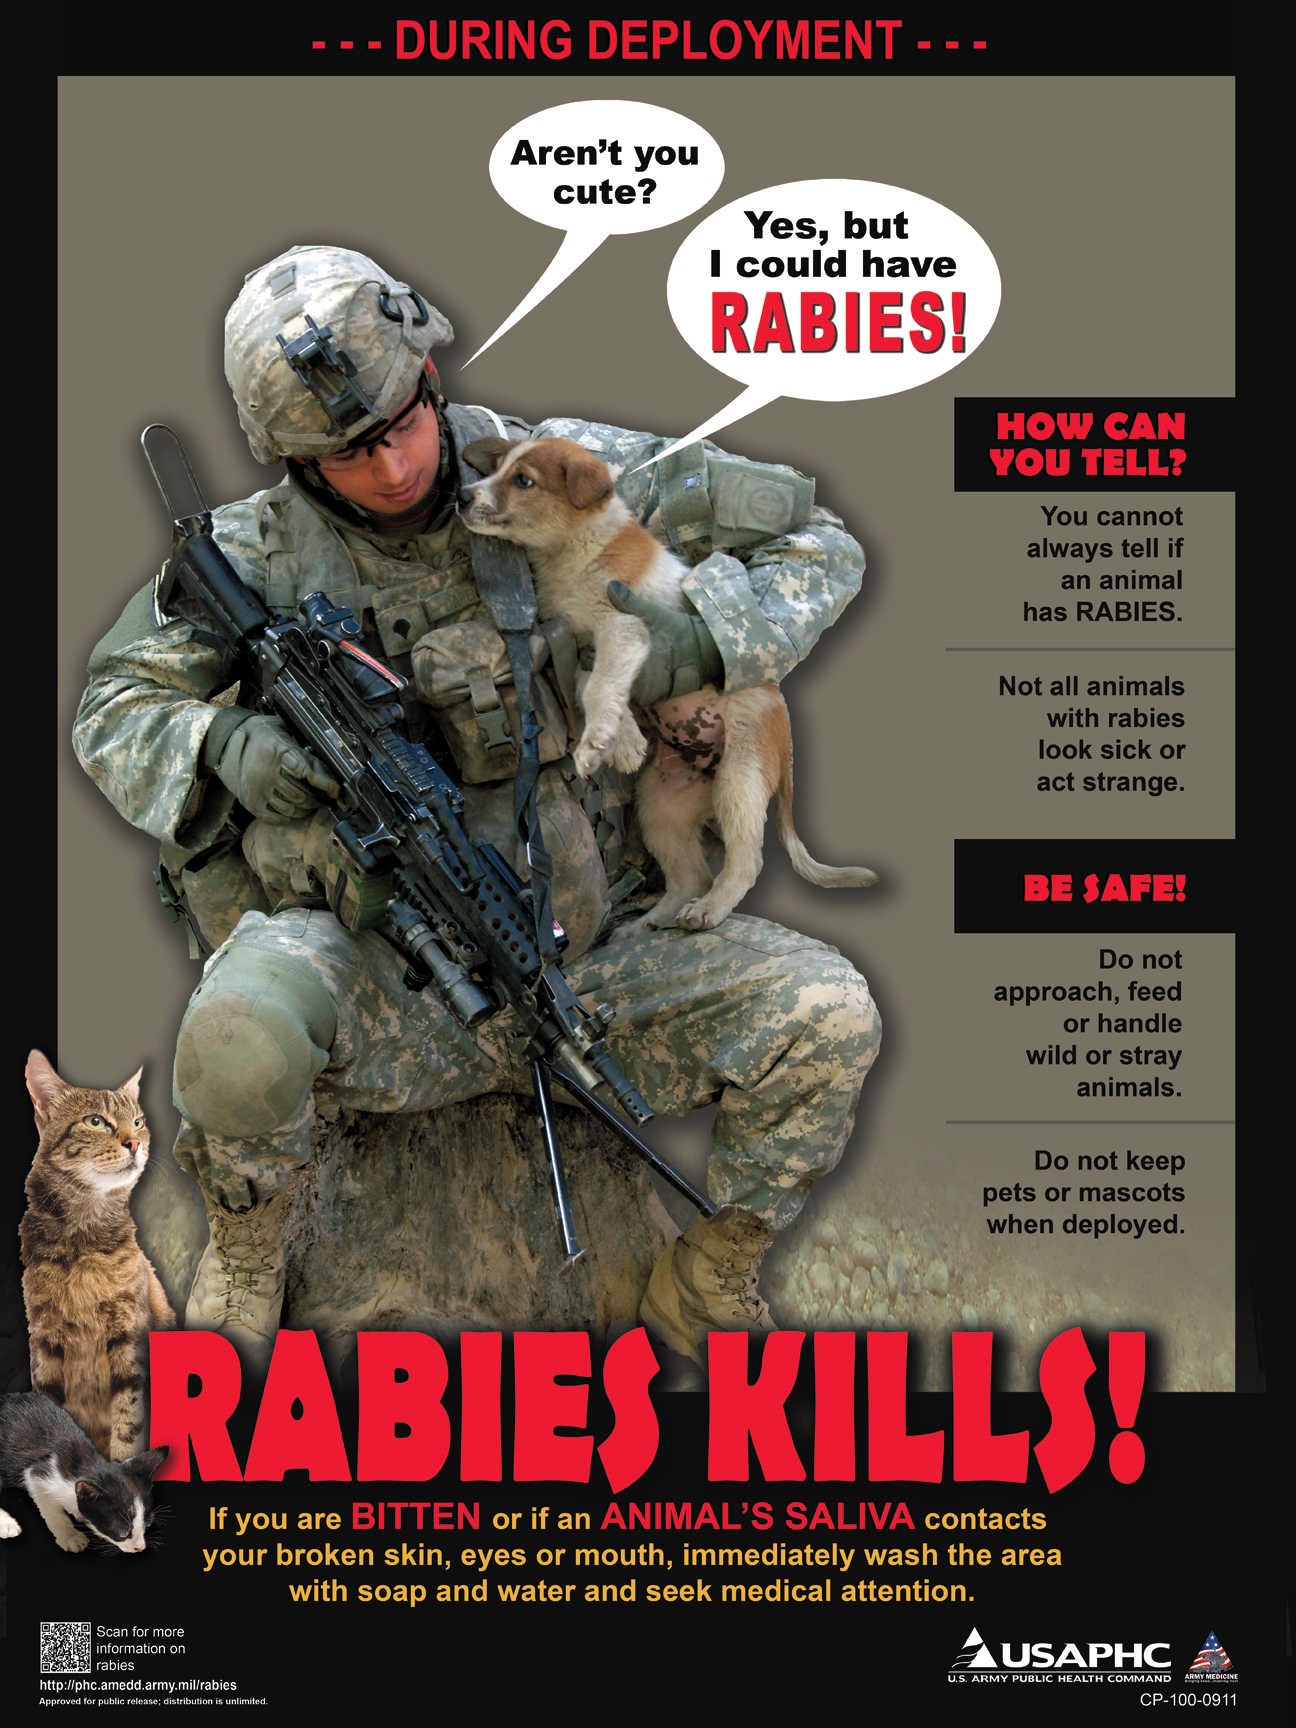 Preventing rabies during deployment | Article | The United States Army